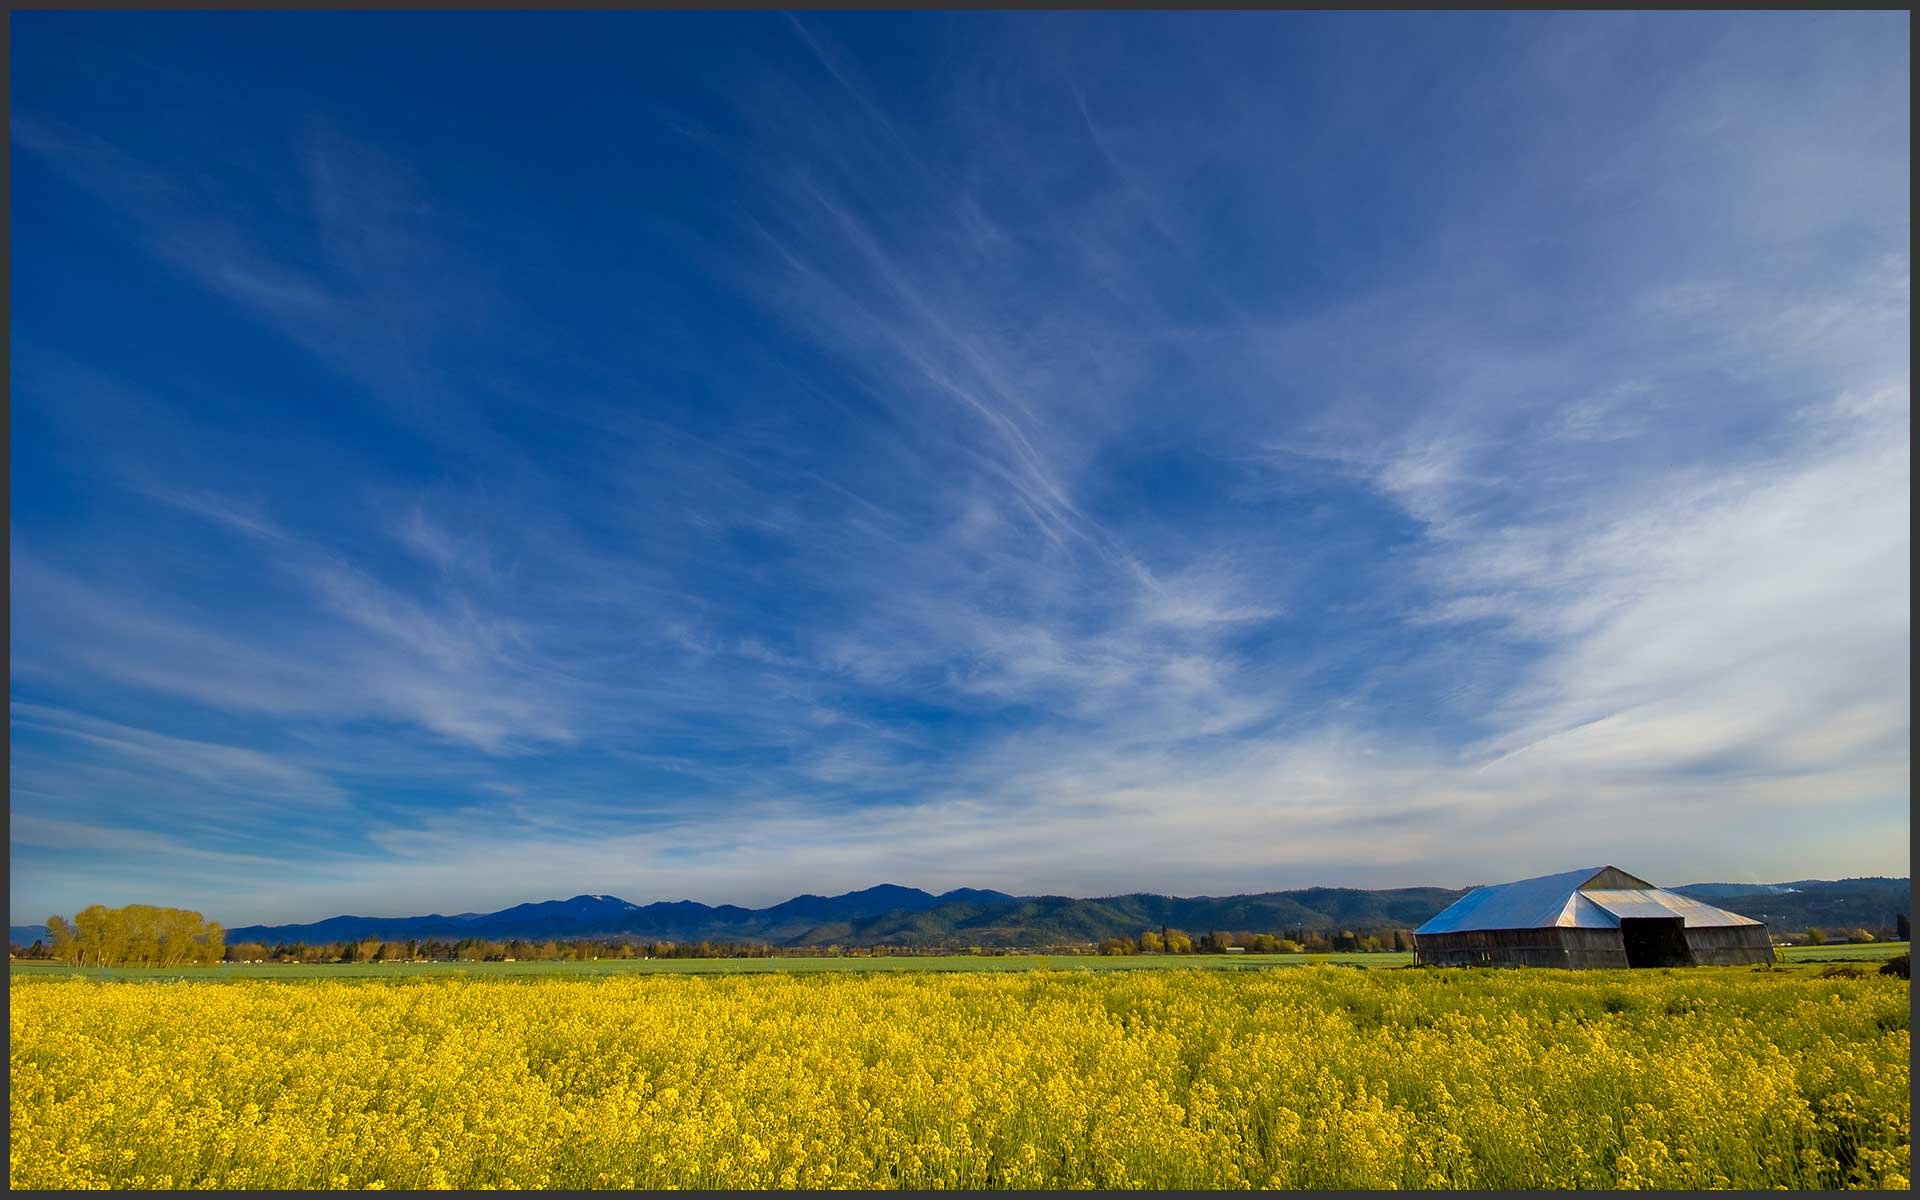 Mustard Field in the Rogue Valley